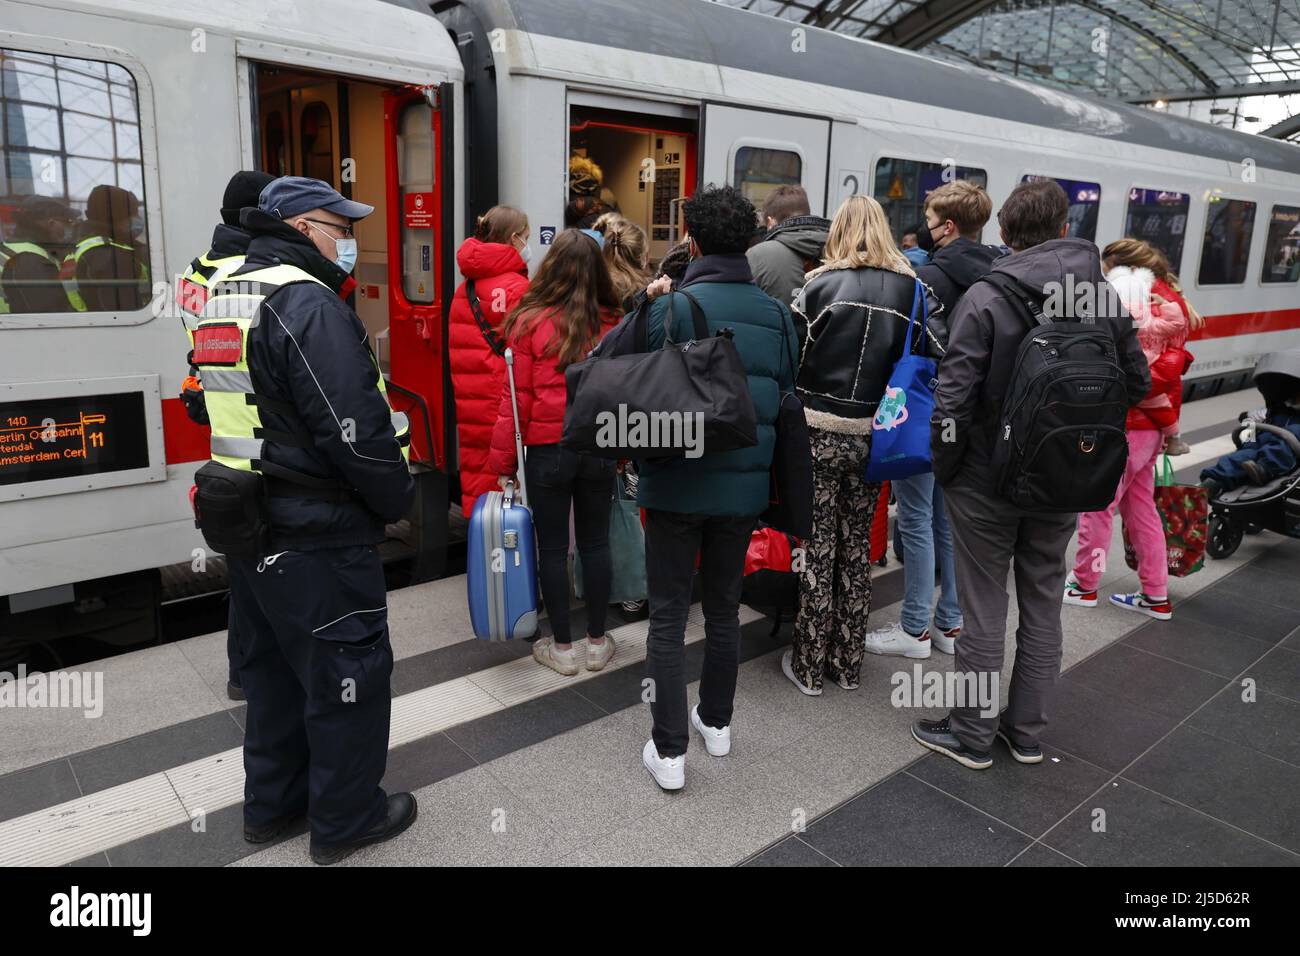 Berlin, 03.03.2022 - Refugees from Ukraine board a train to Amsterdam at Berlin Central Station. Thousands of refugees from Ukraine have already arrived in Germany. [automated translation] Stock Photo